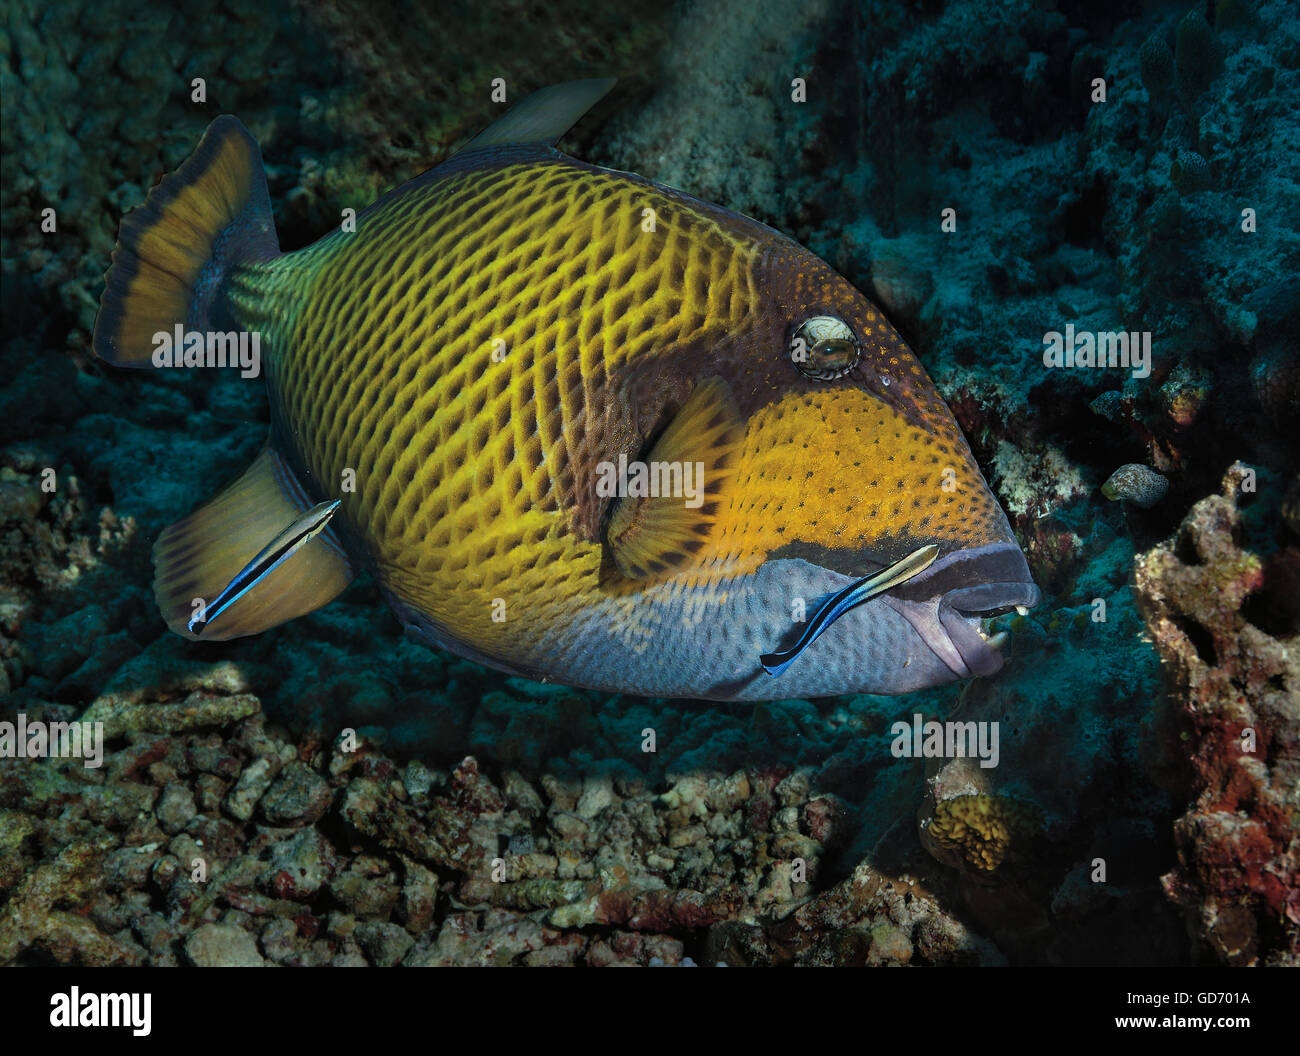 Cleaner Wrasse, Labroides dimidiatus, cleaning Titan Triggerfish, Balistoides viridescens, on coral reef, Maldives, Indian Ocean Stock Photo